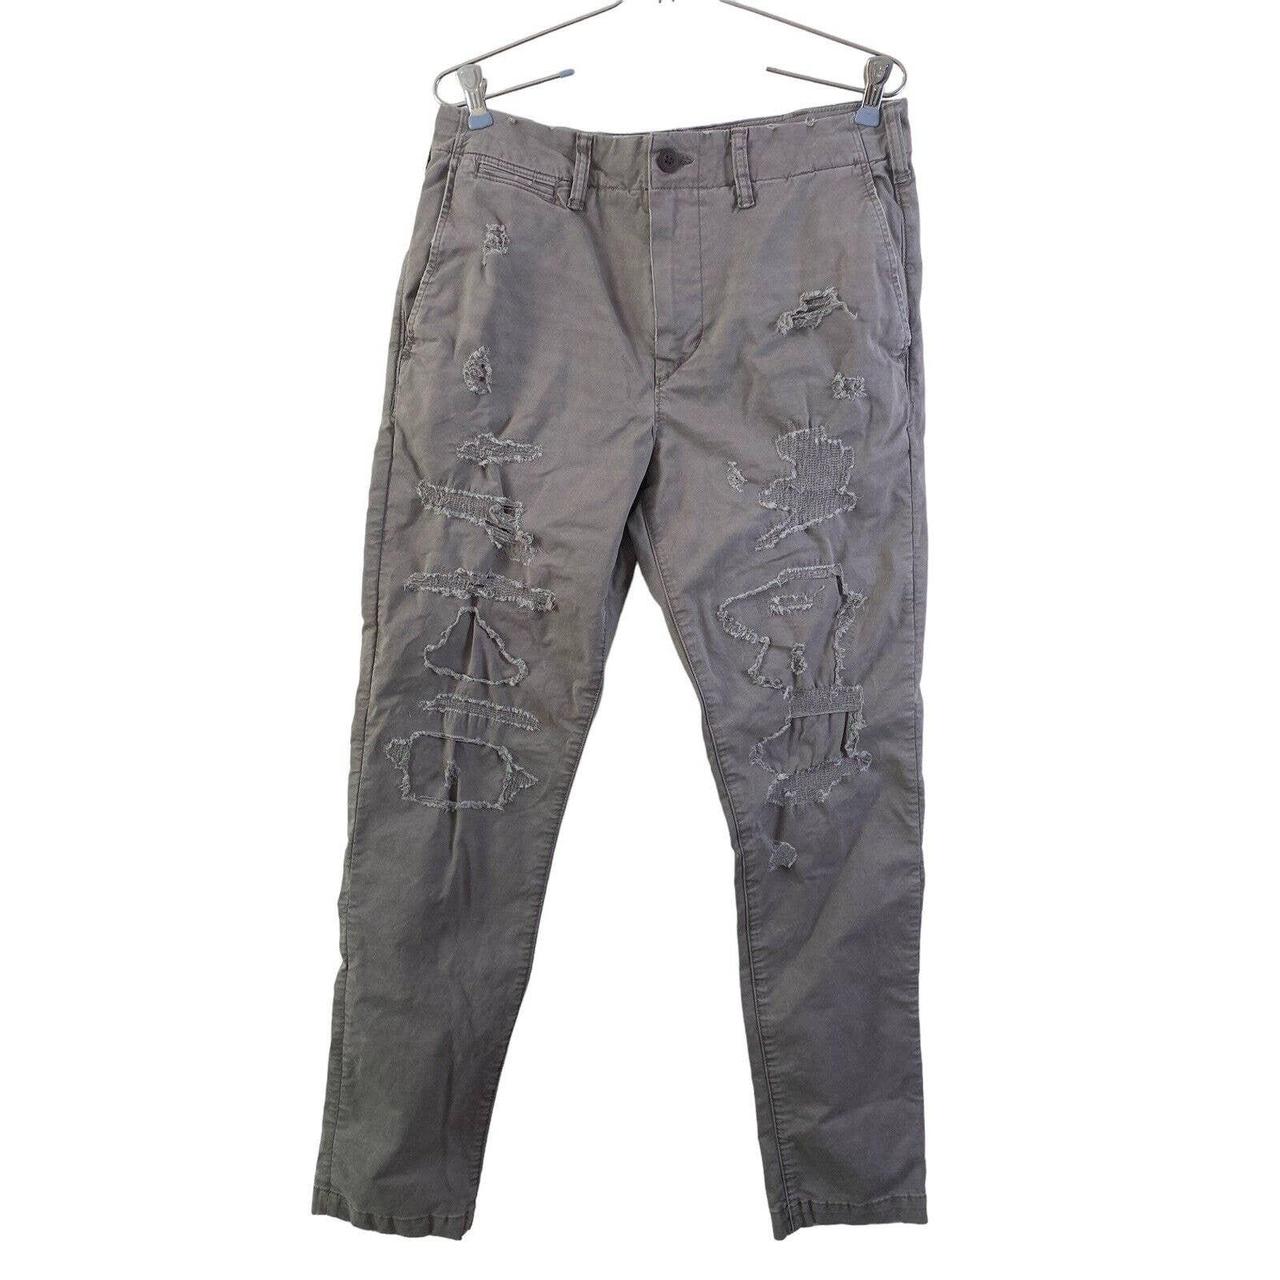 Pepe Jeans Men 34 Length Trousers Size 32 - Buy Pepe Jeans Men 34 Length  Trousers Size 32 online in India